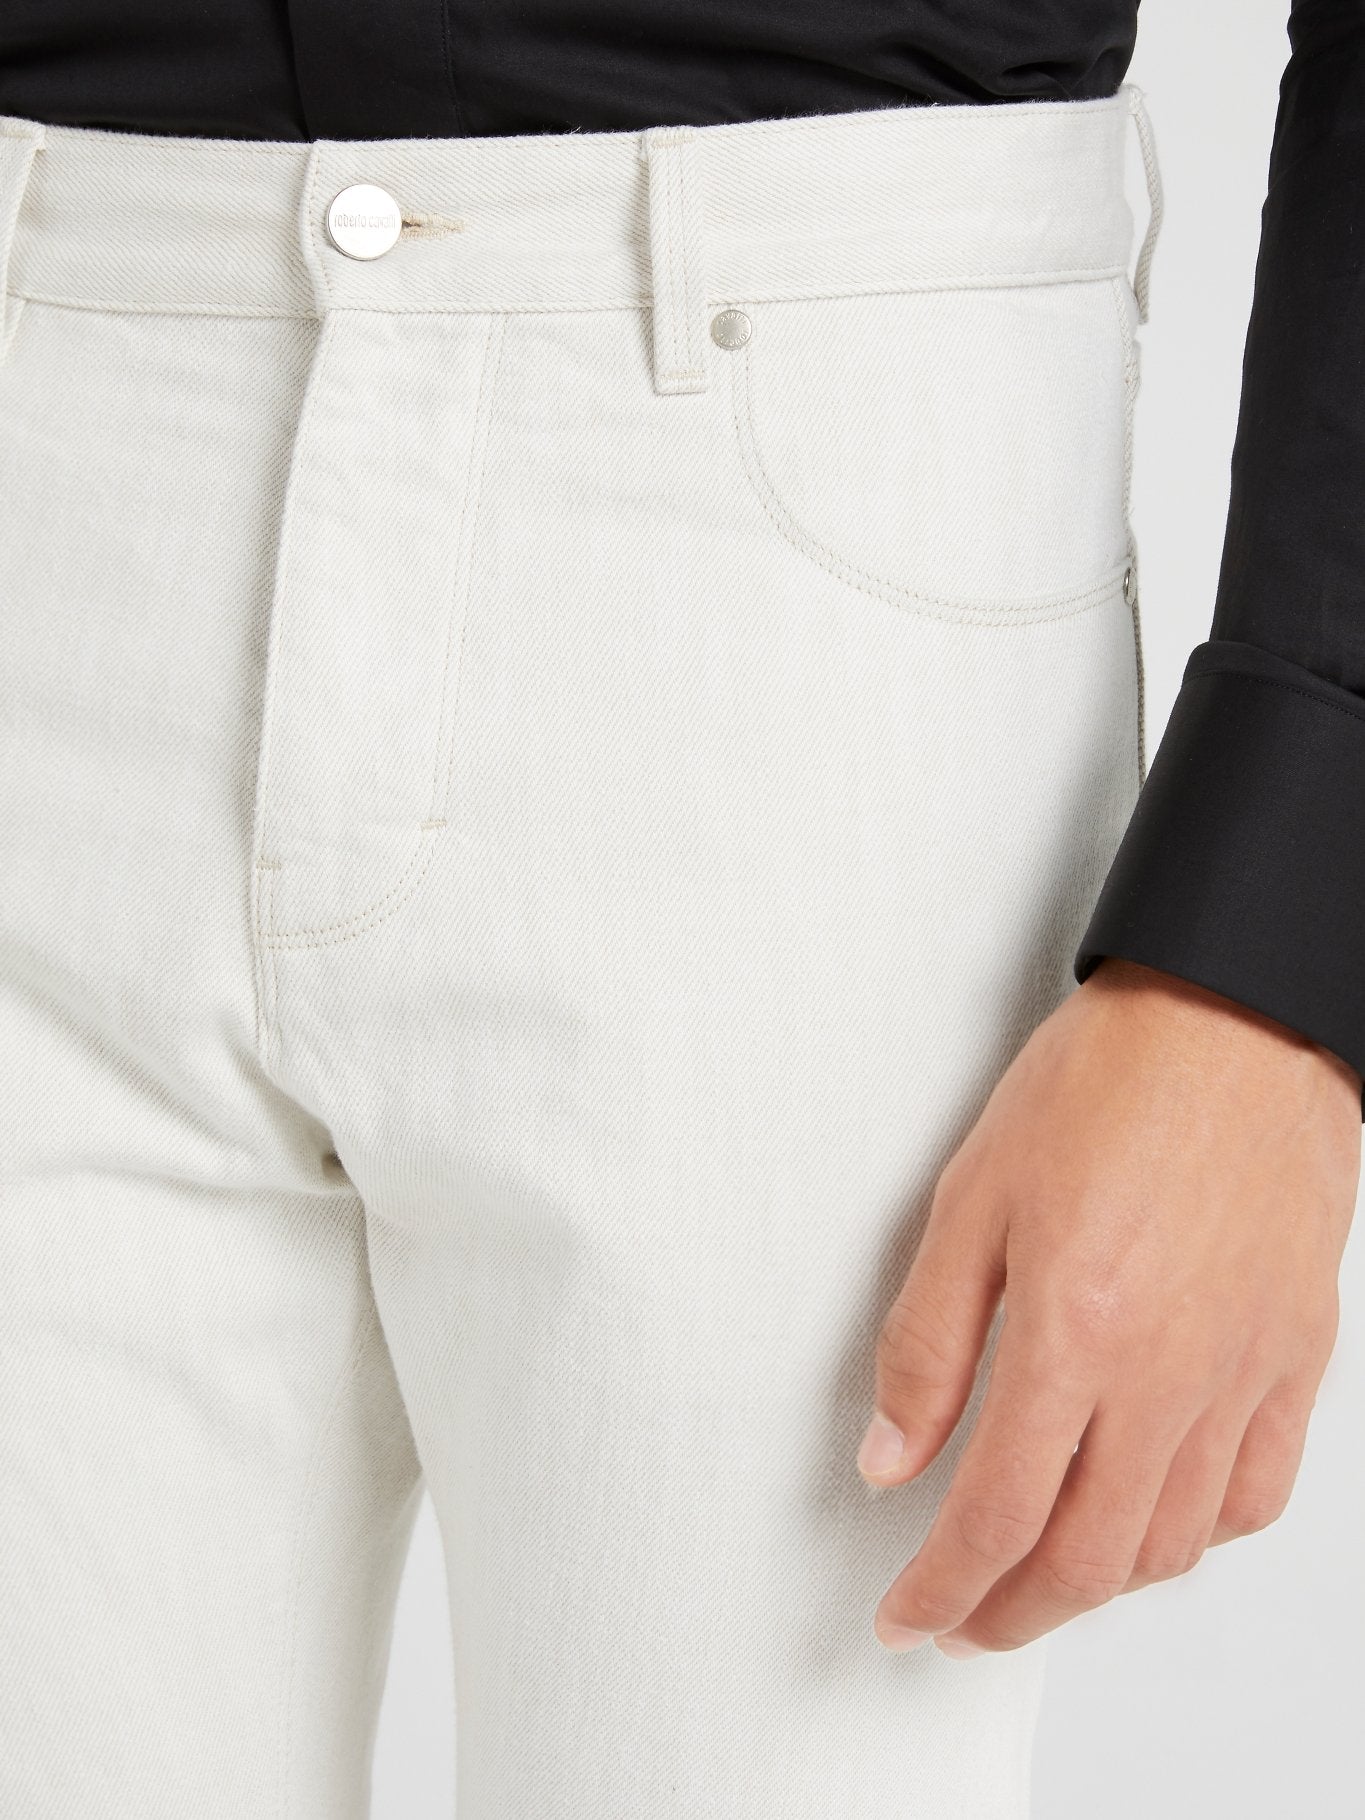 White Slim Fit Woven Trousers